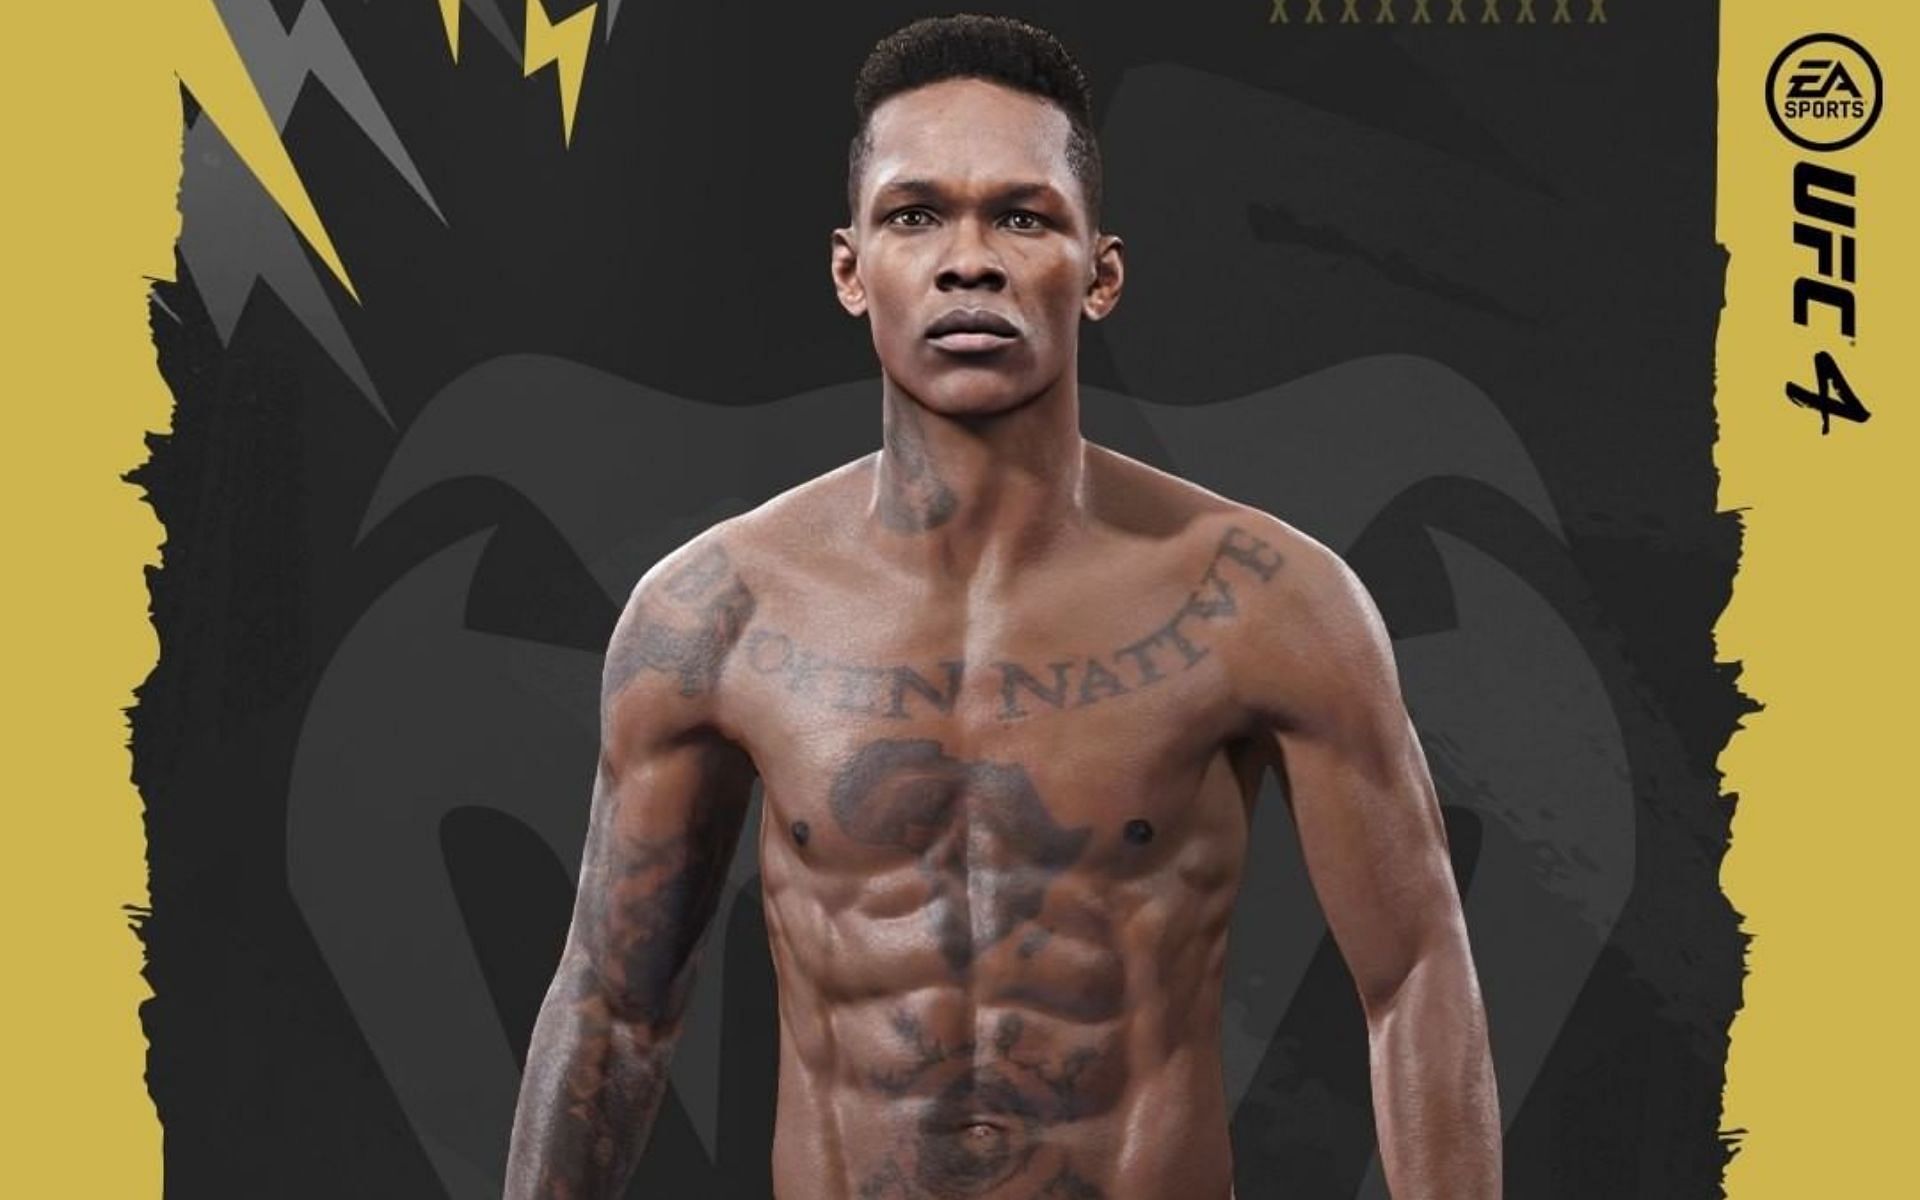 Israel Adesanya on the cover of EA Sports UFC 4